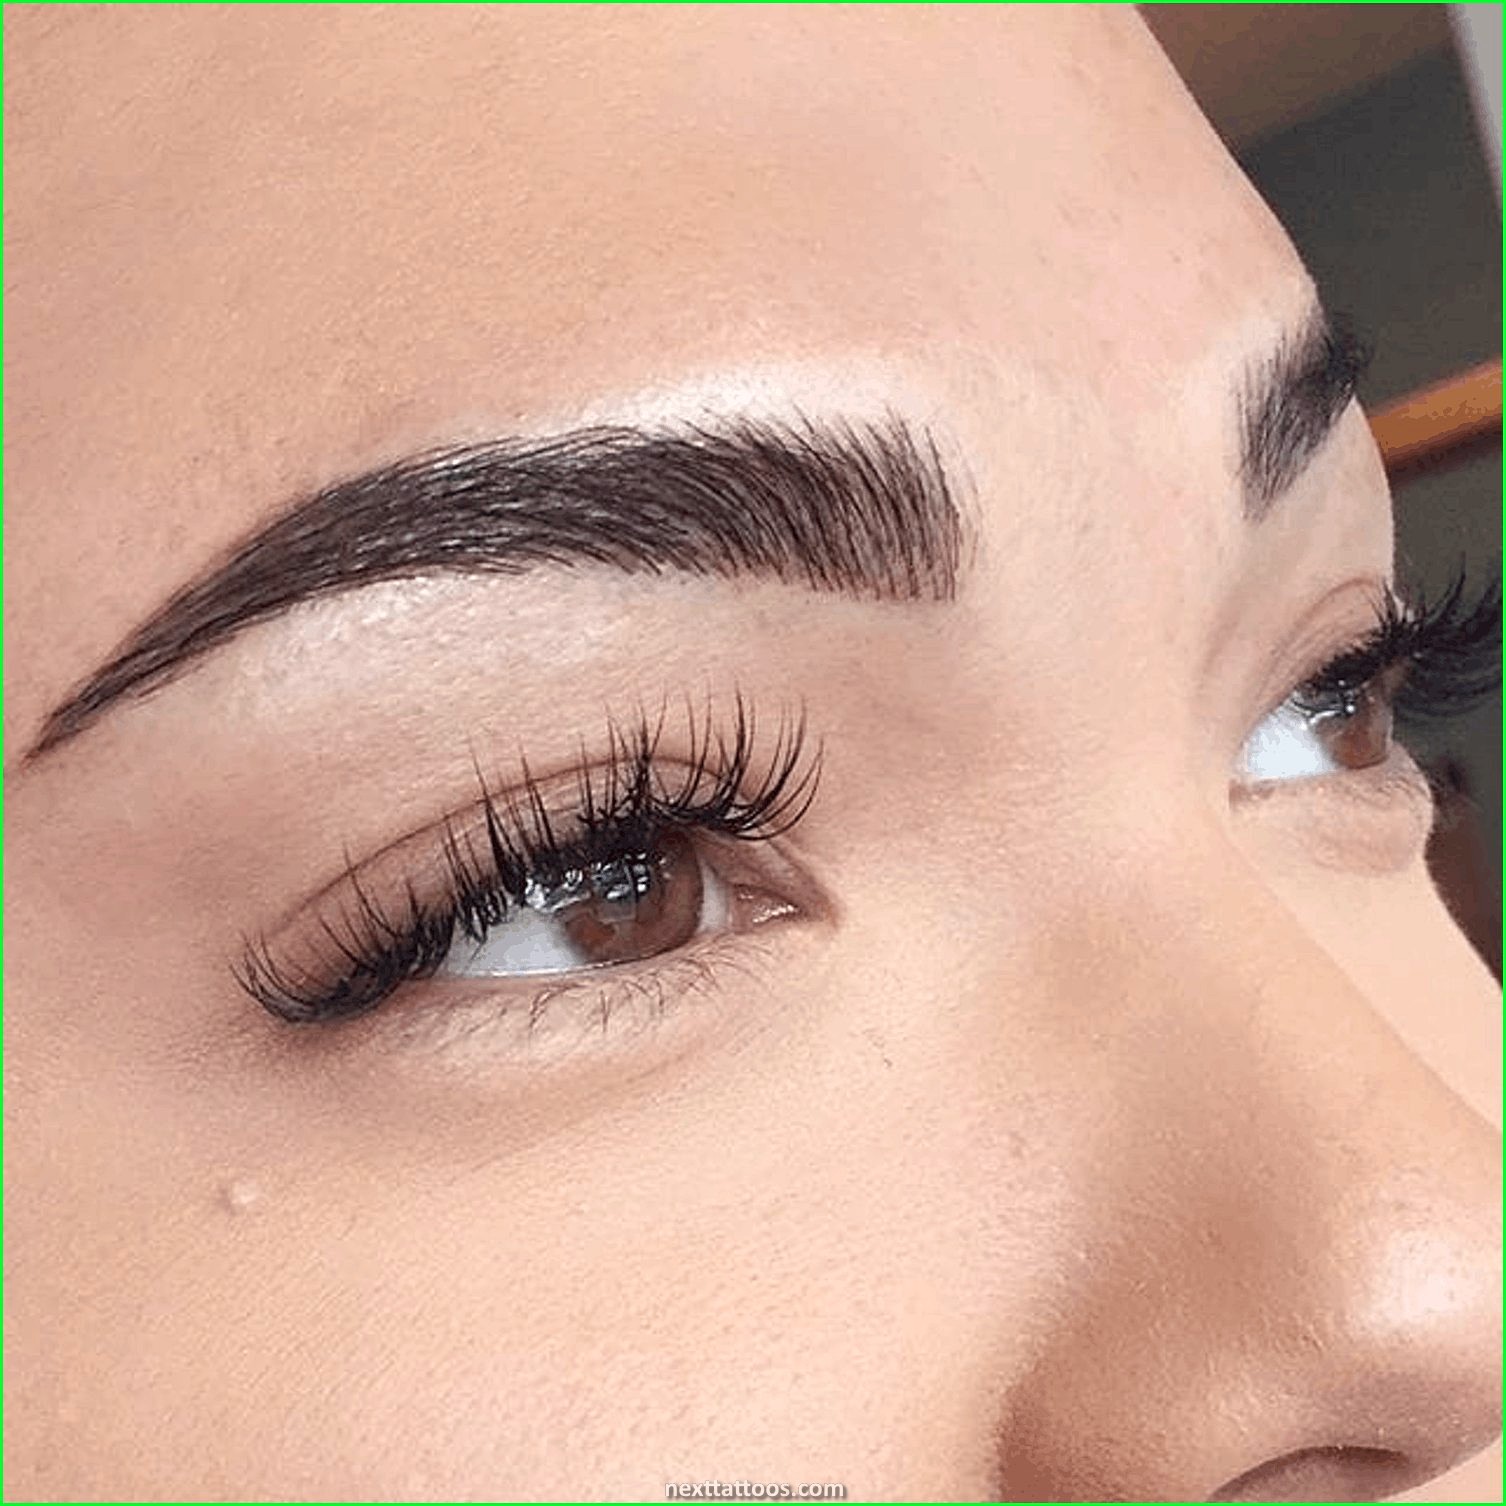 Eyebrow Tattoo Berlin - How to Choose an Eyebrow Tattoo Design That's Right For You